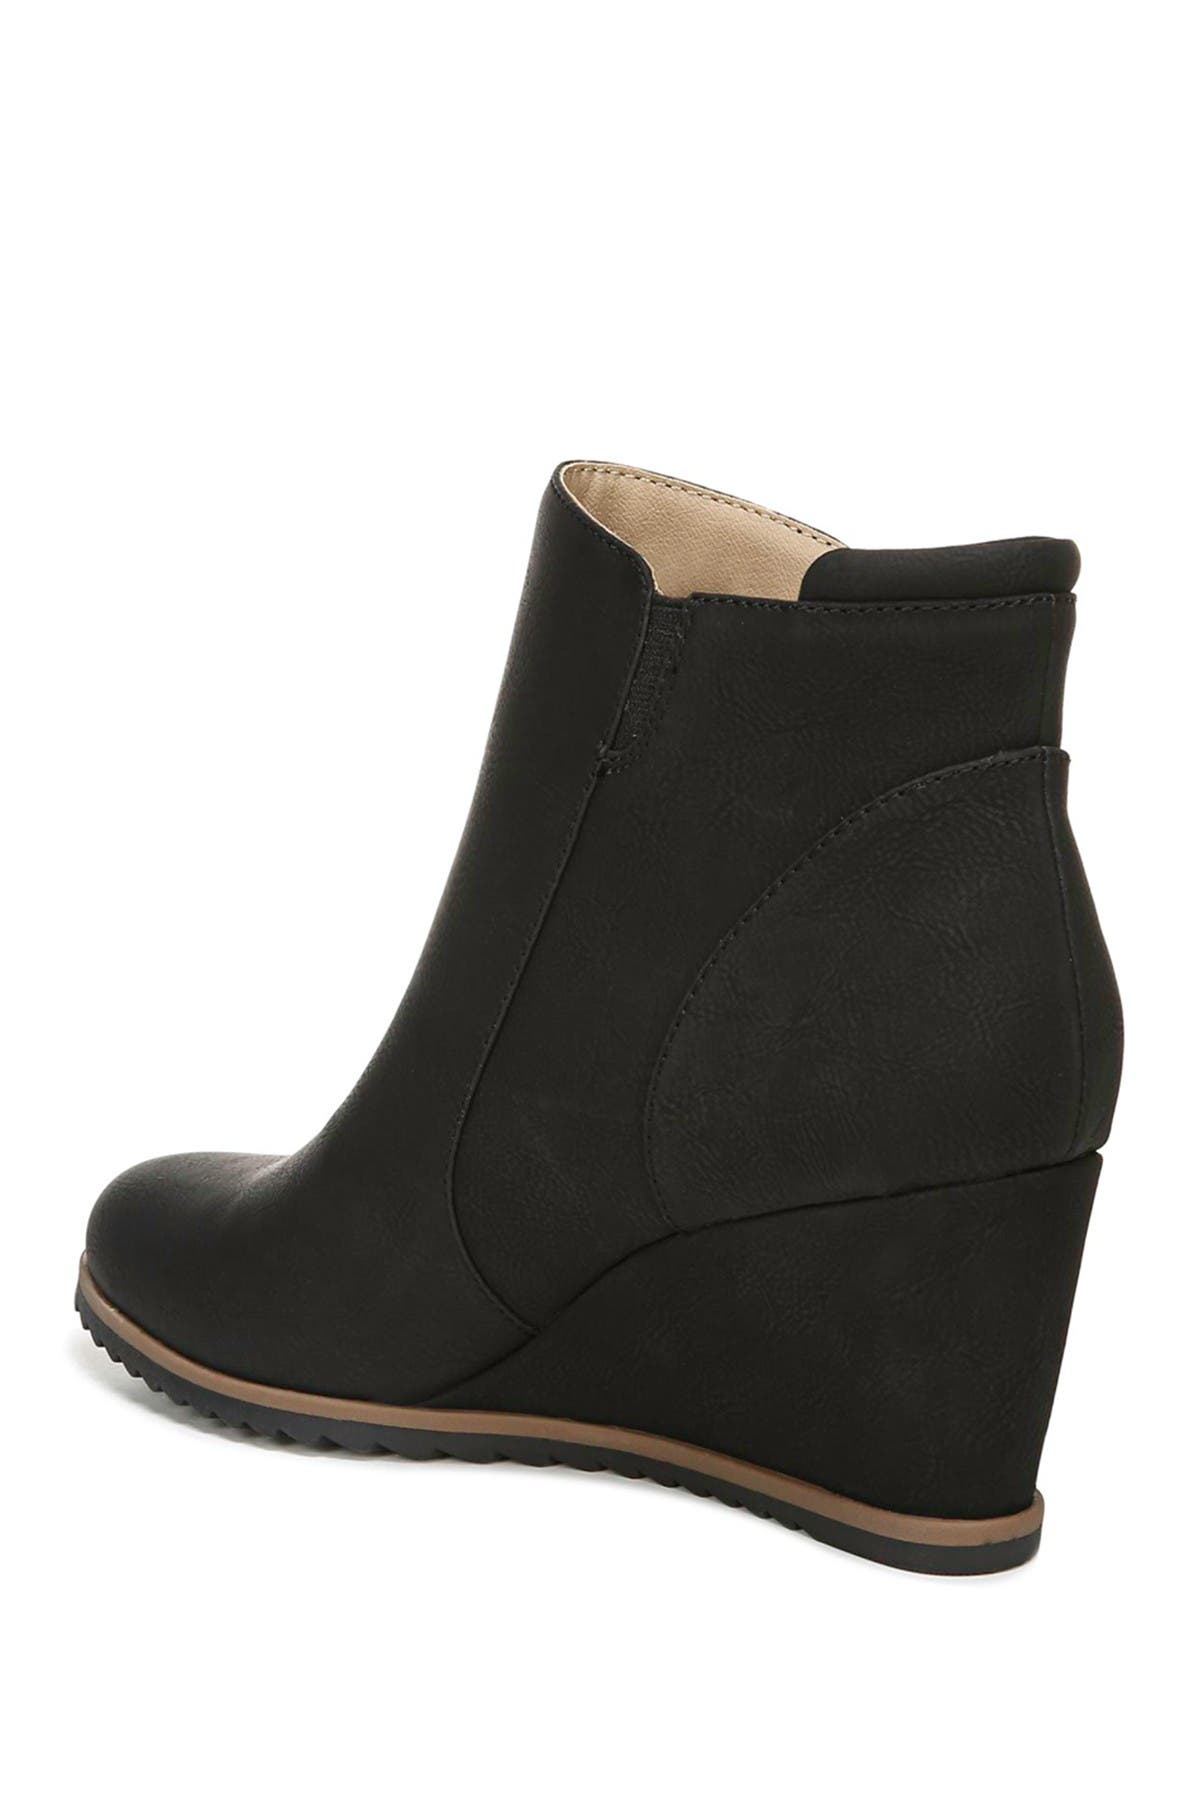 wide width wedge boots